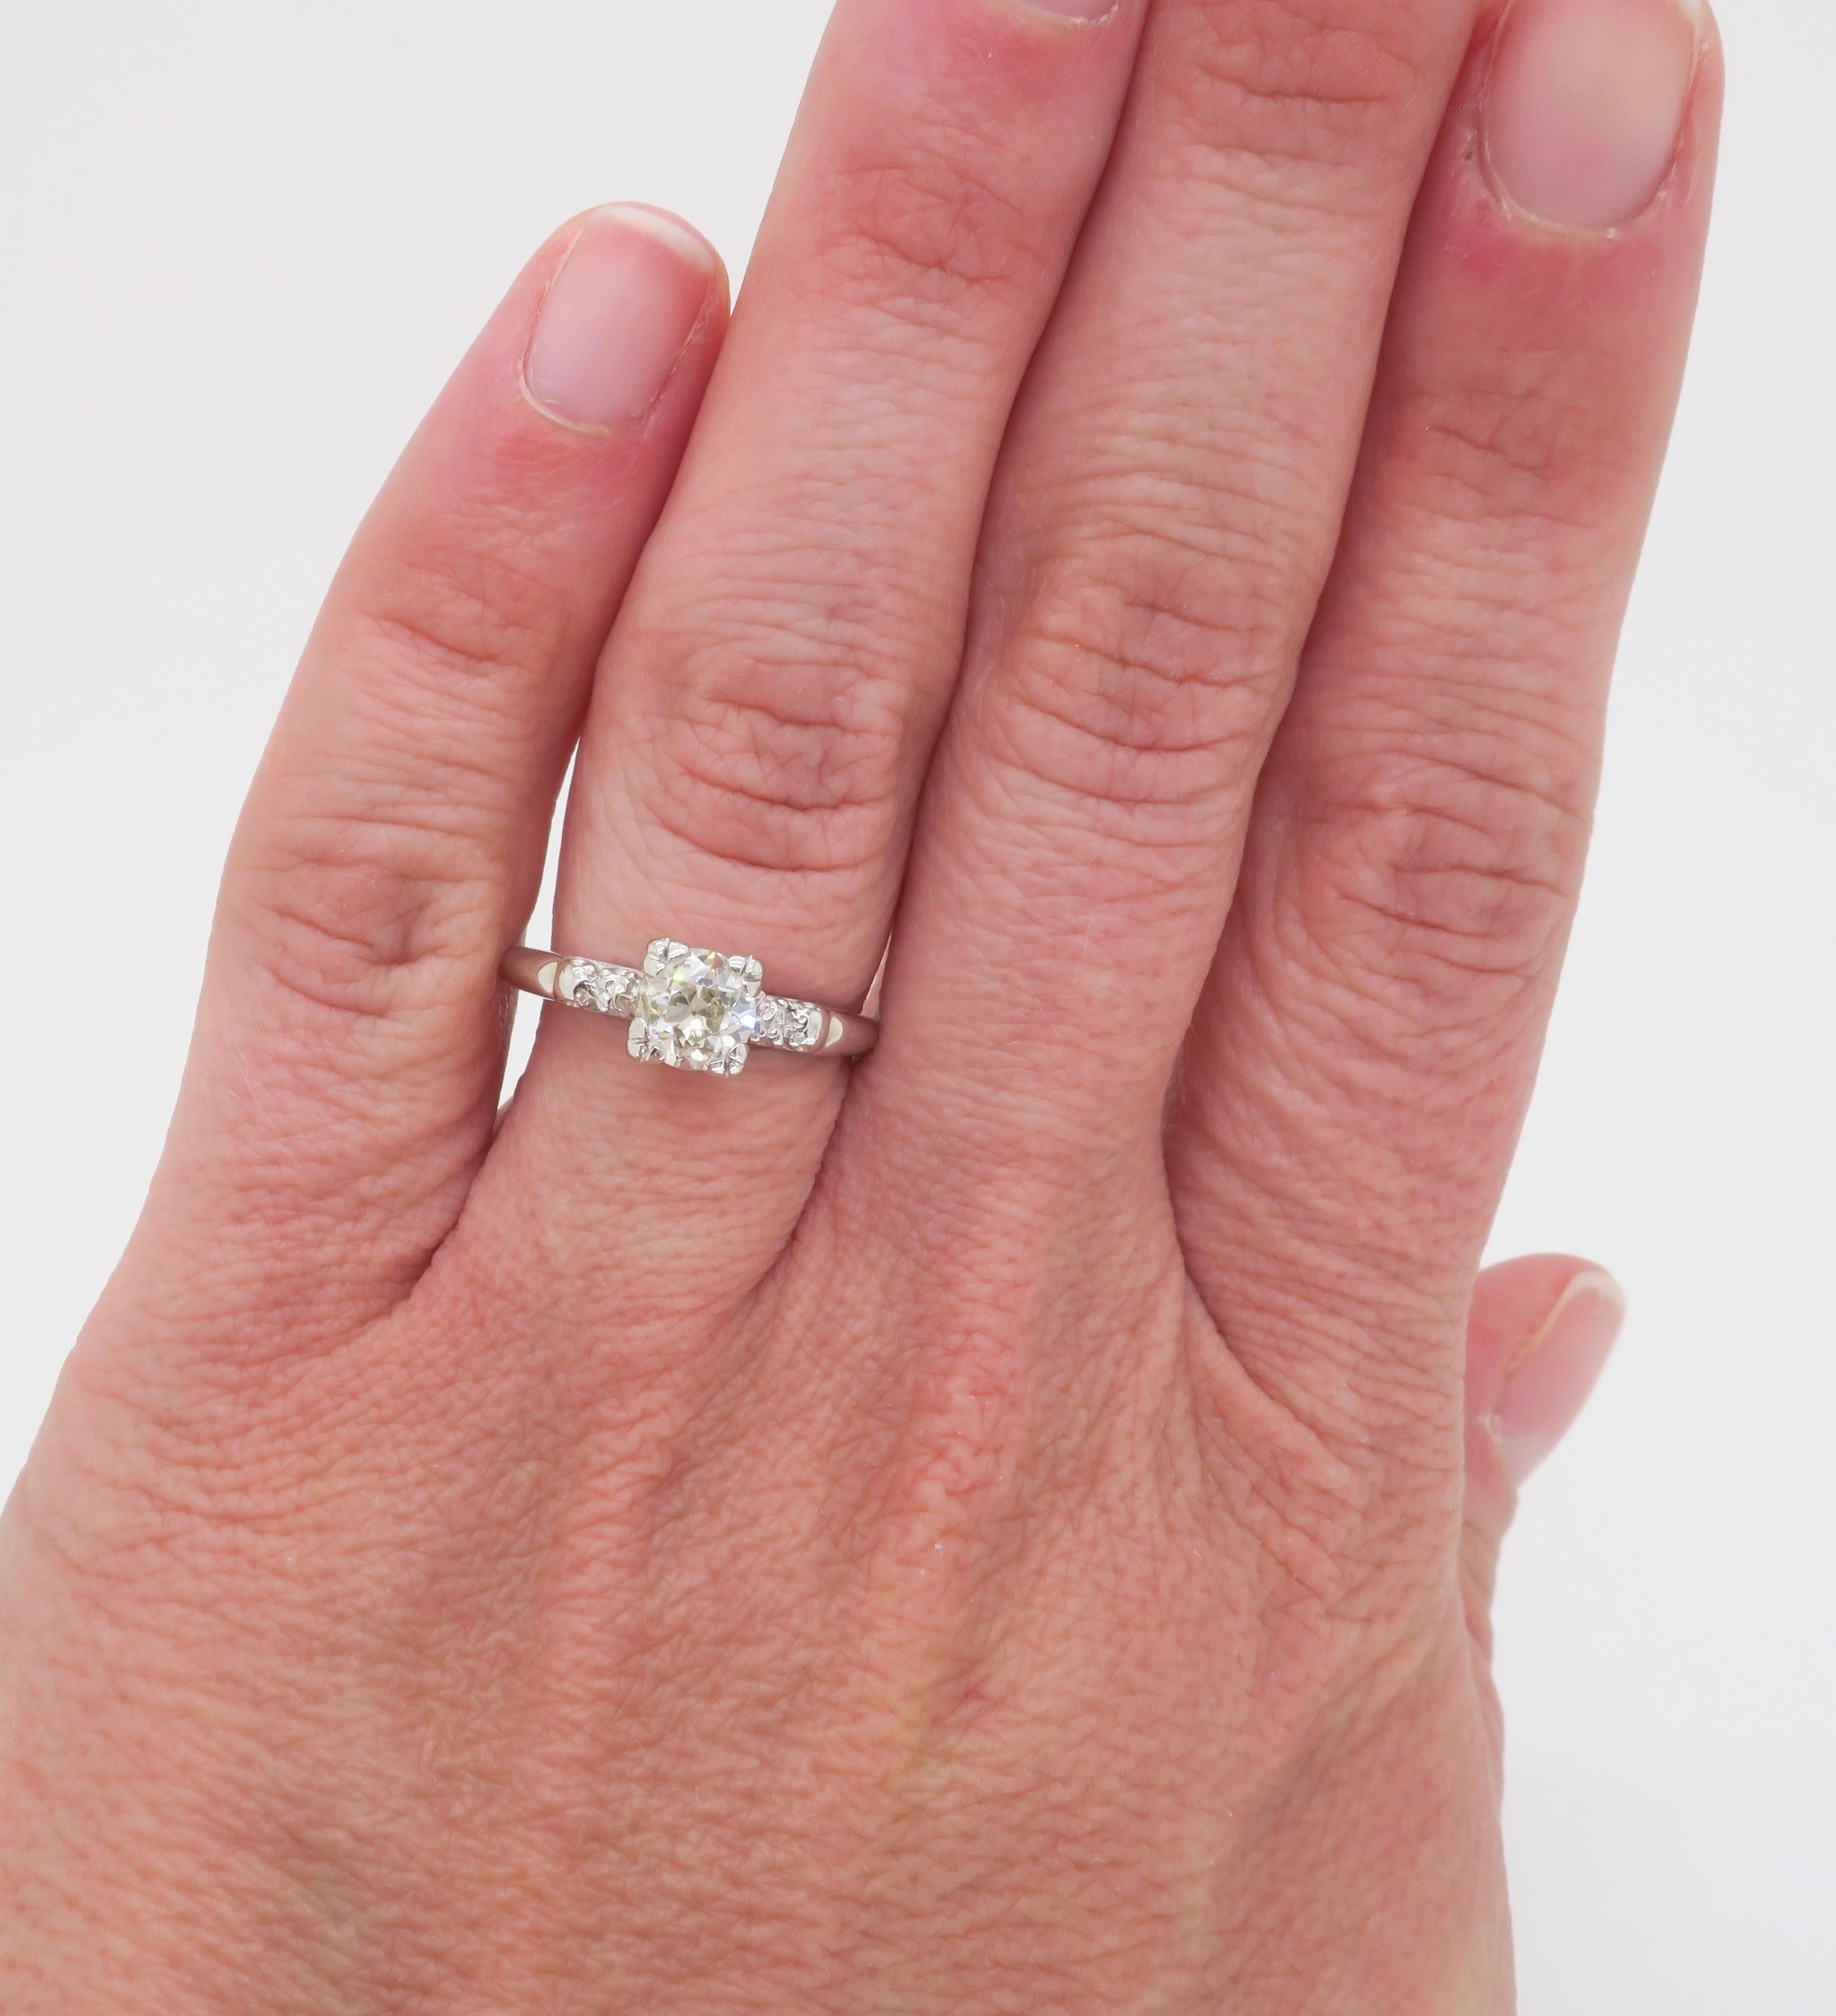 Vintage Diamond Engagement ring featuring an Old Mine Cut Diamond in the center. 

Center Diamond Carat Weight: Approximately .65CT
Center Diamond Cut: Old Mine Cut
Center Diamond Color: J-K
Center Diamond Clarity: I1
Metal: 14k White Gold 
Stamped: